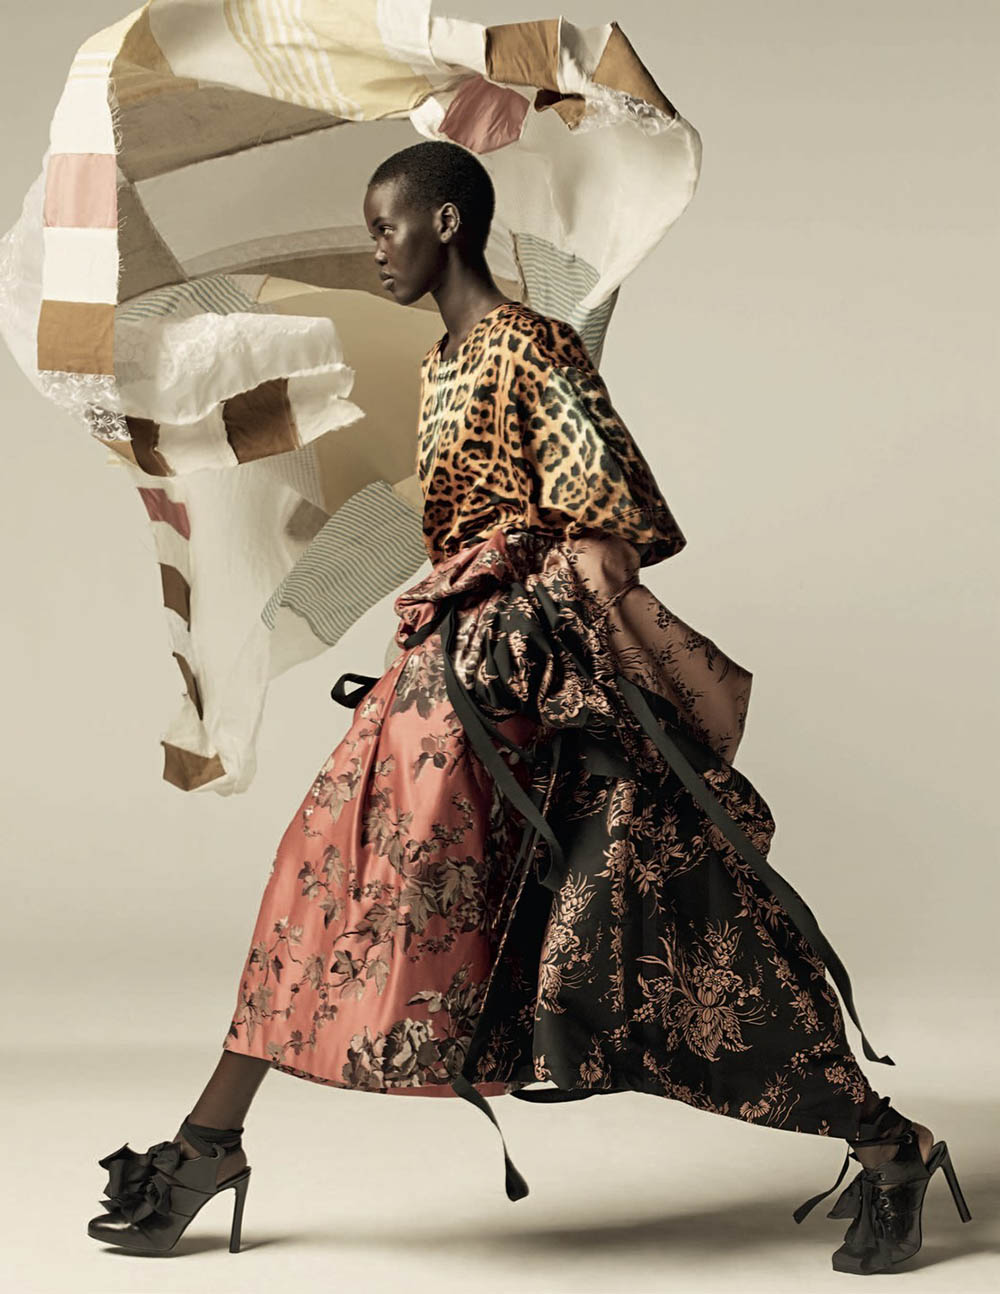 Adut Akech and Rianne van Rompaey by Craig McDean for British Vogue February 2020